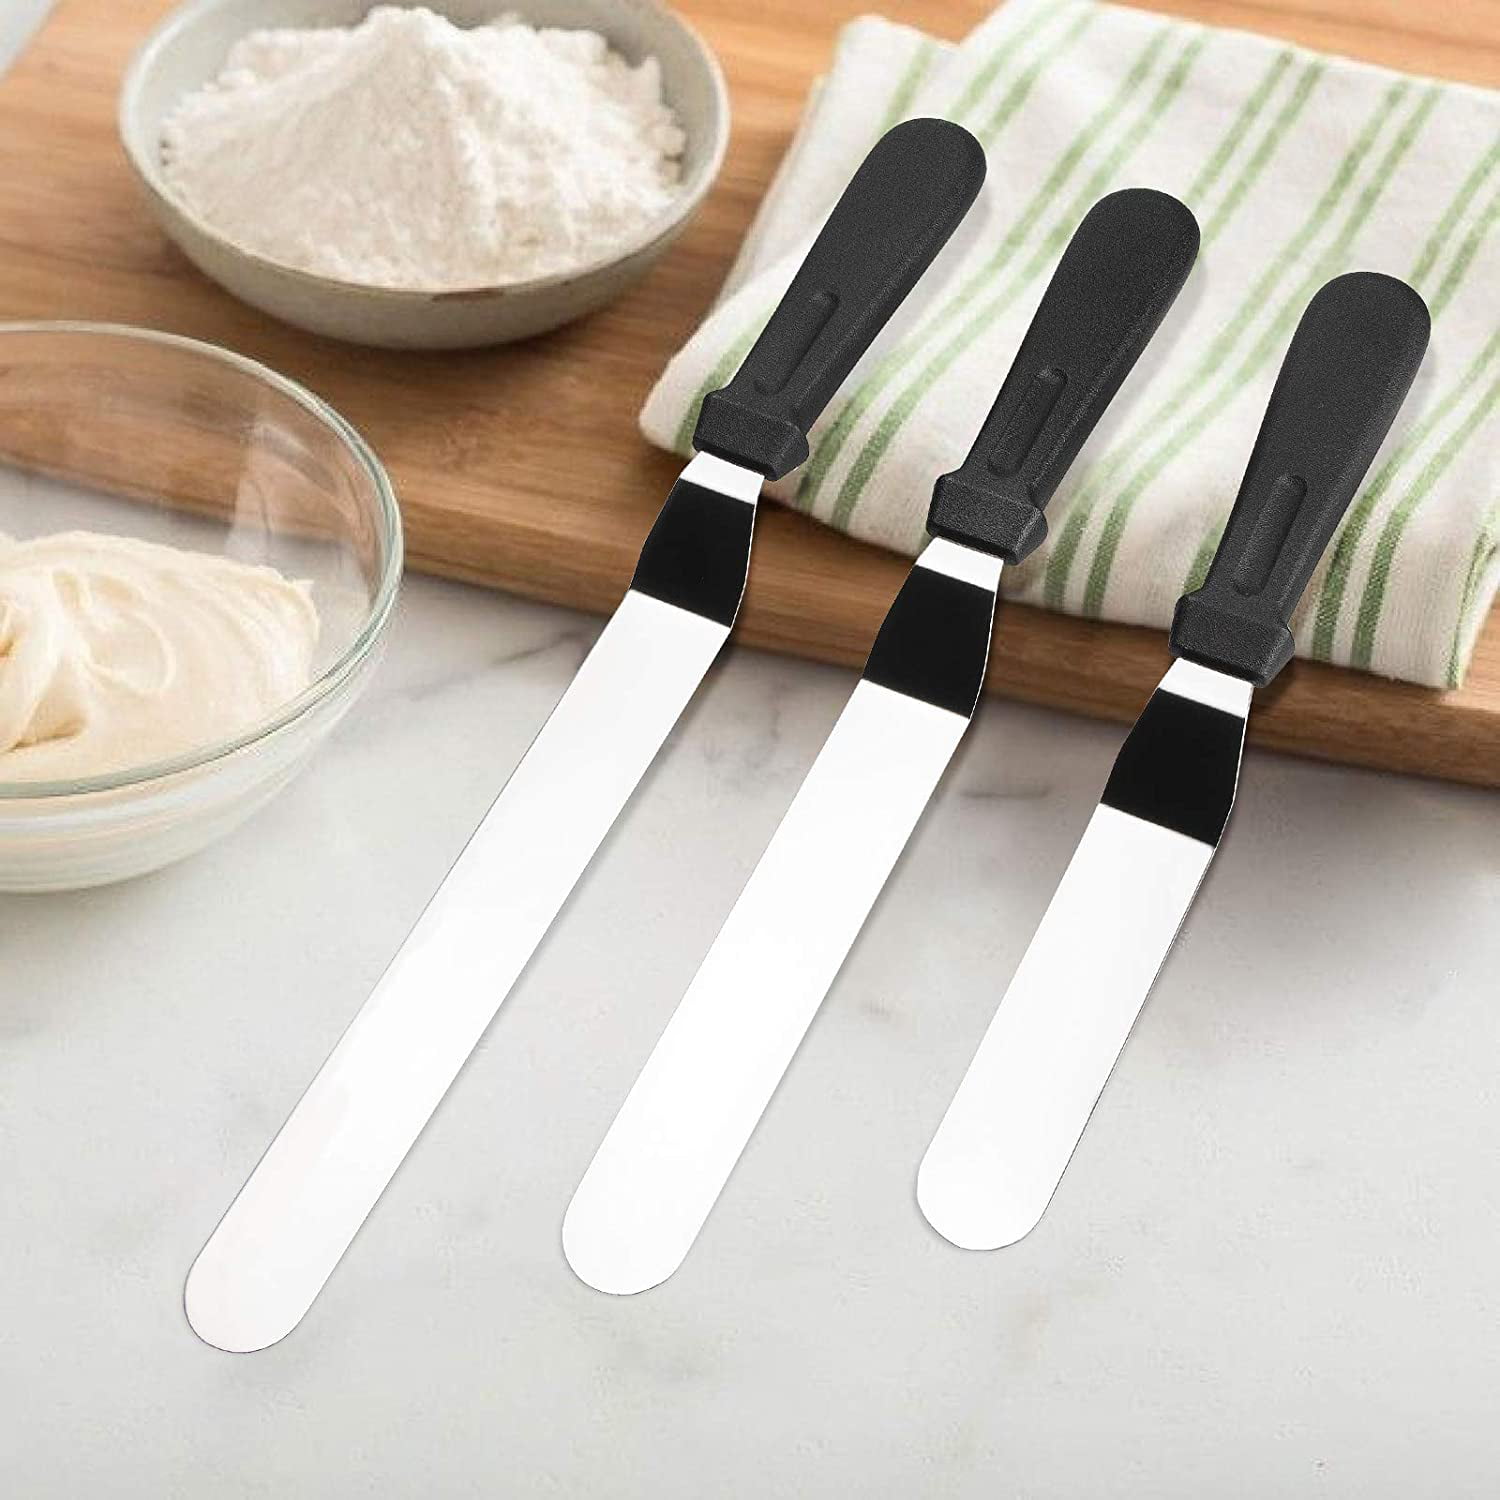 Icing Spatula, U-Taste Offset Spatula Set with 6, 8, 10 Blade,Stainless  Steel Angled Cake Decorating Frosting Spatula Set of 3 (Black)